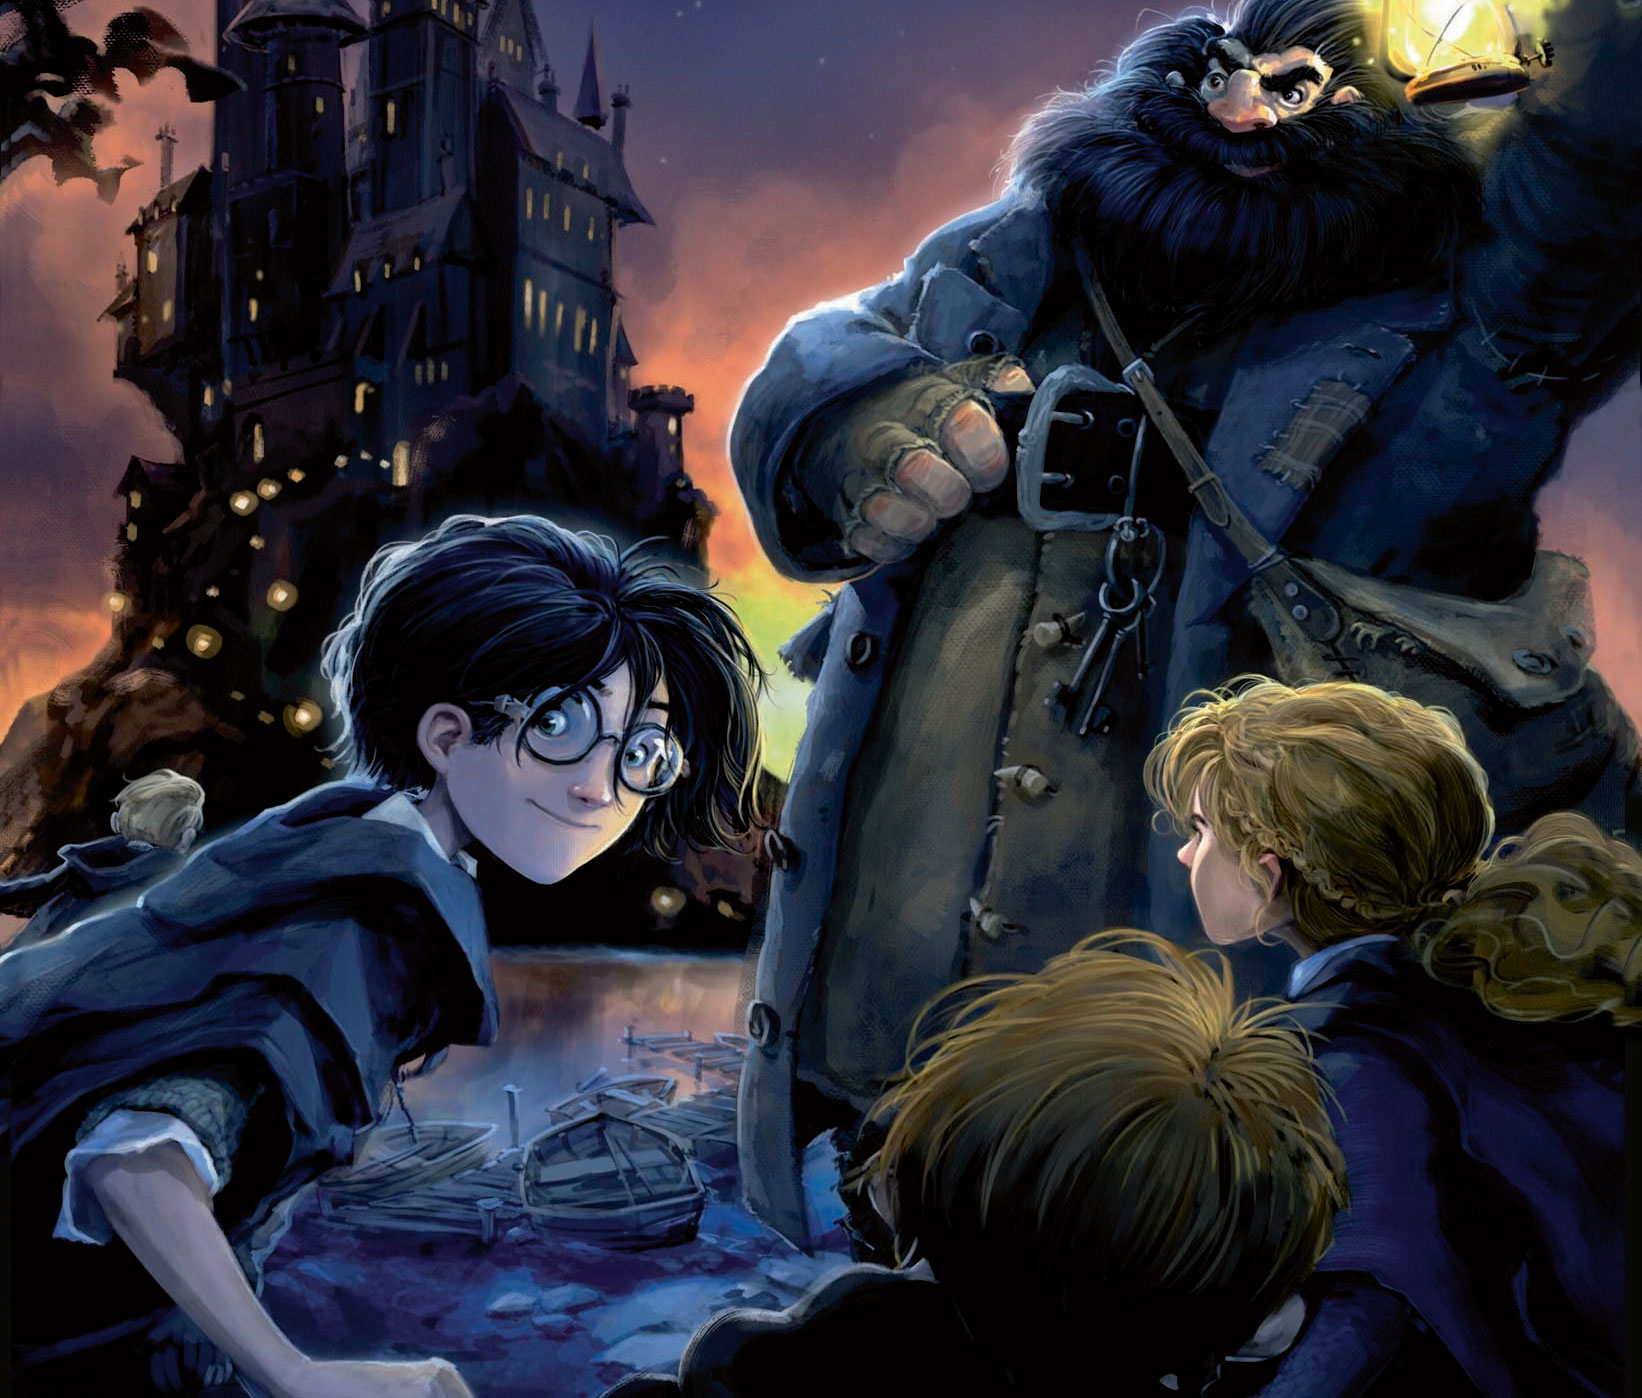 What if Harry Potter was an Anime?